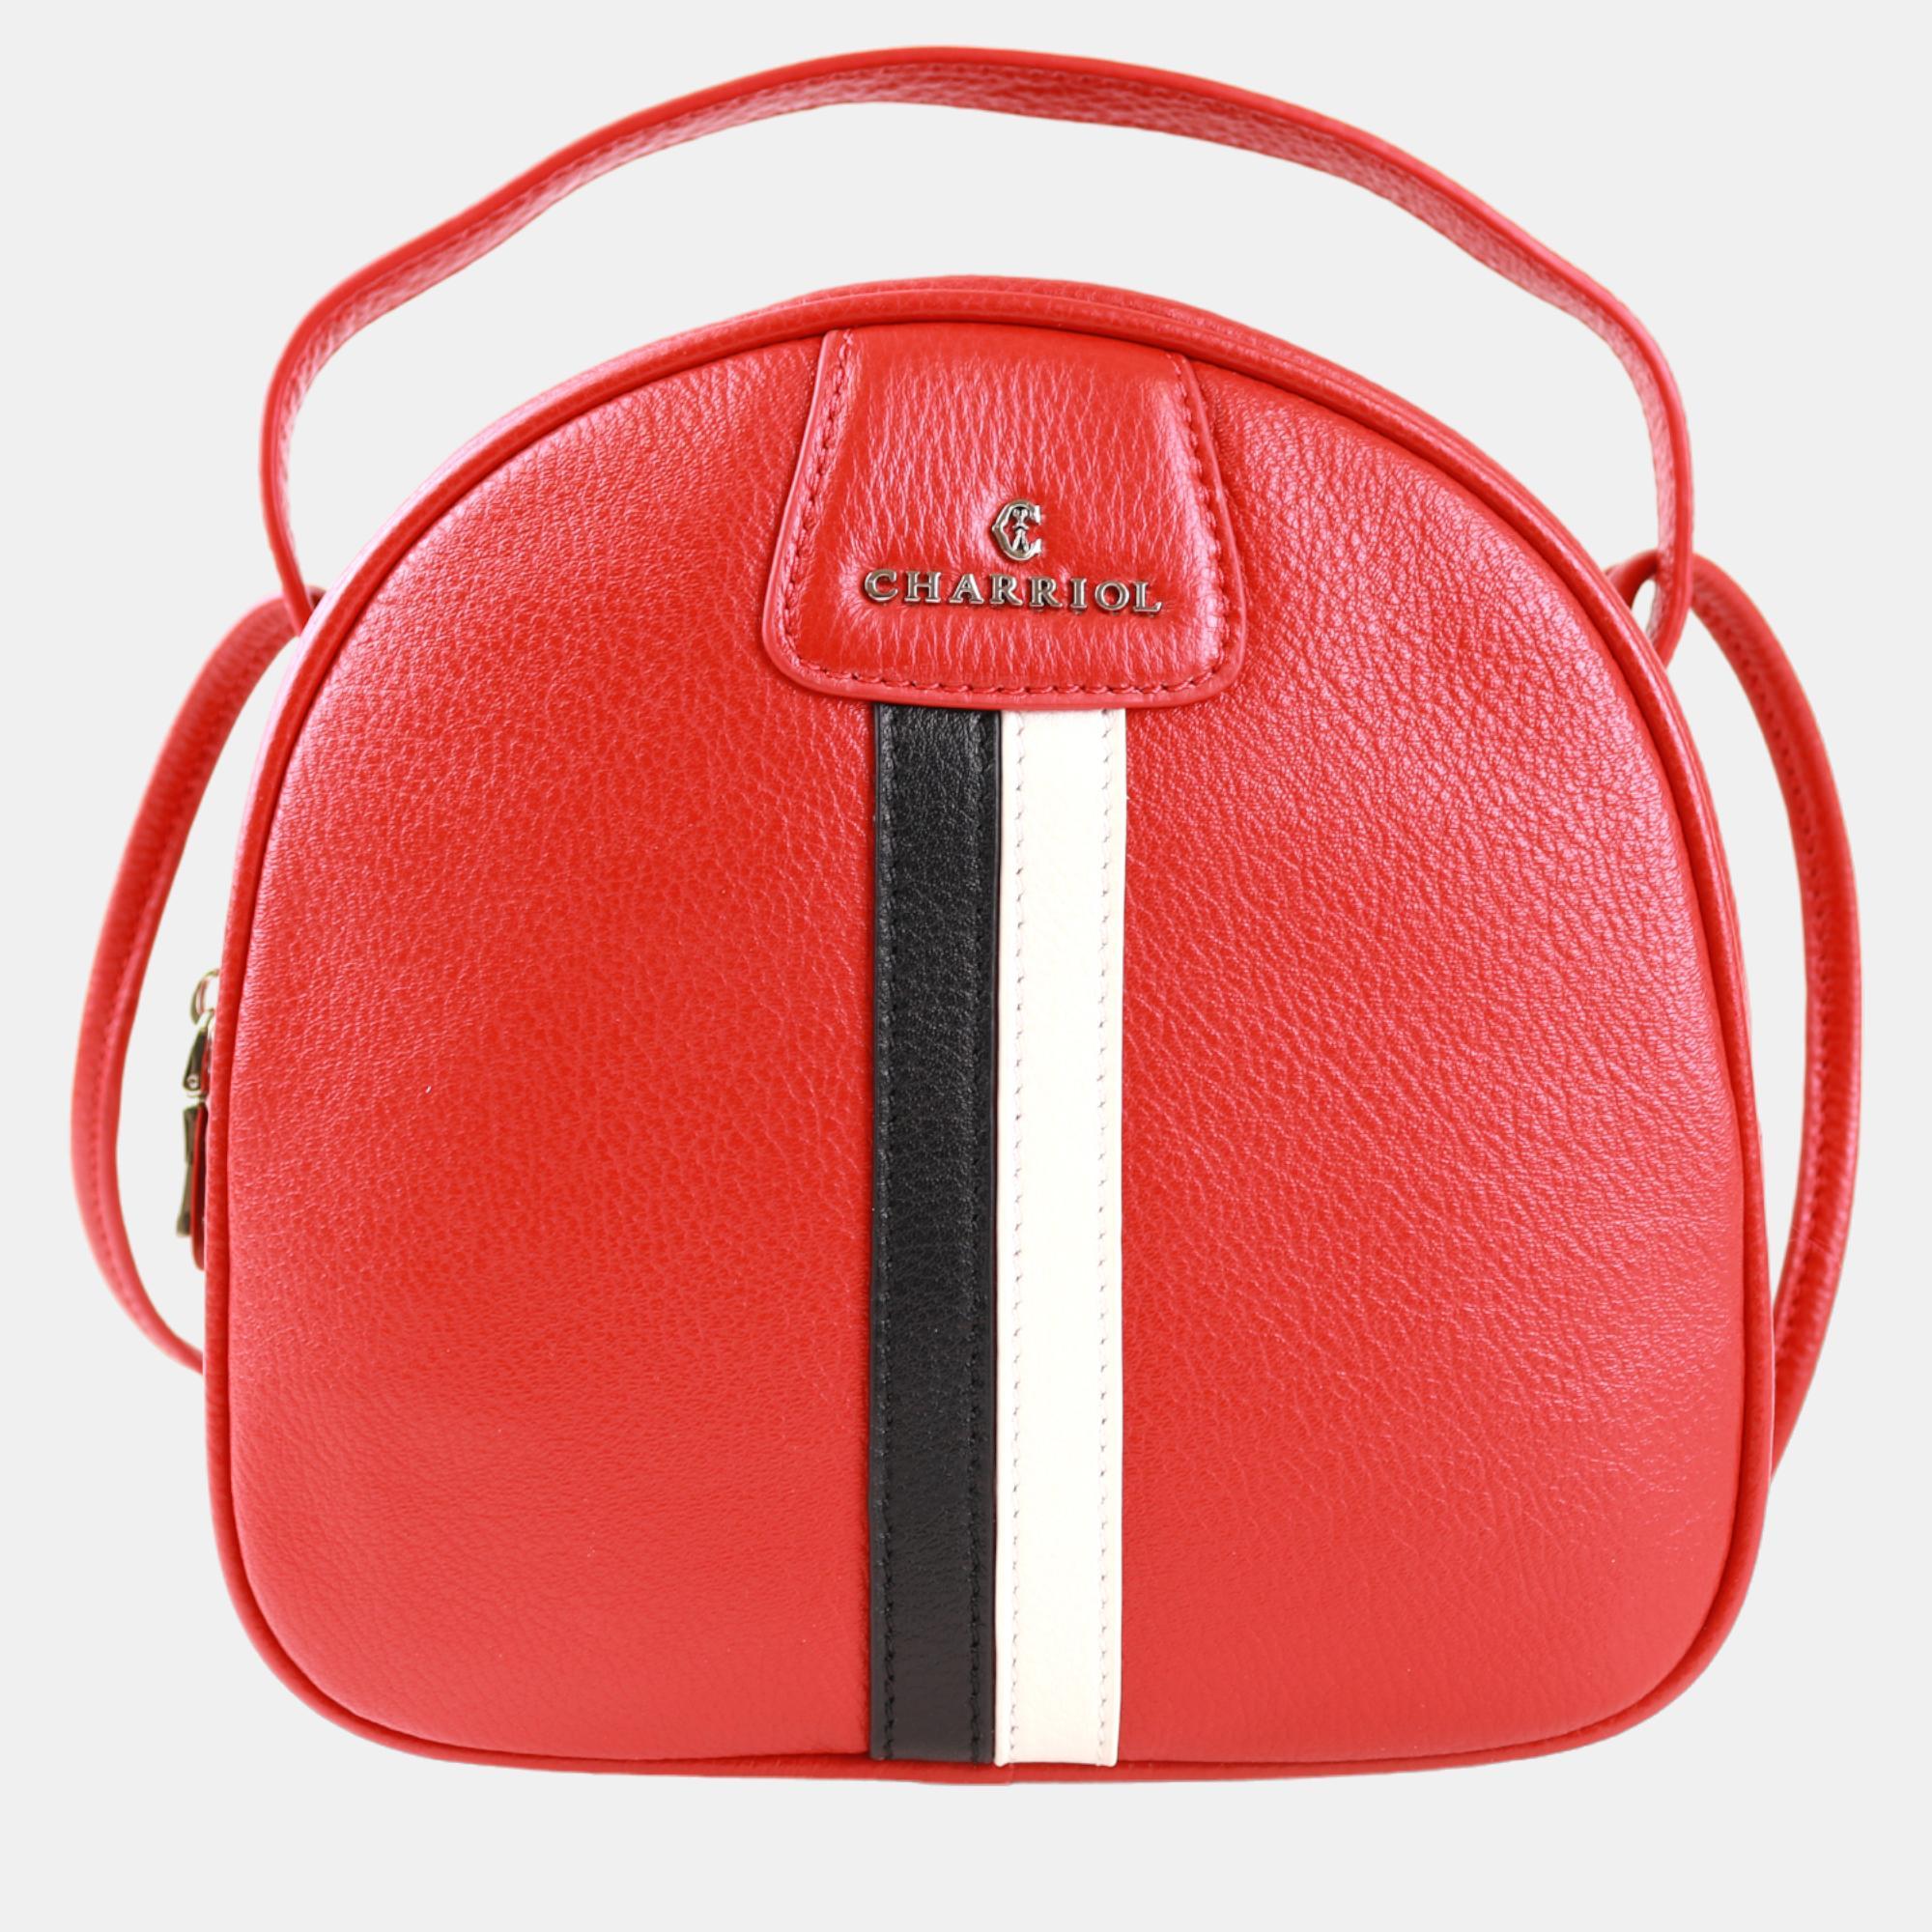 Pre-owned Charriol Red Leather Conic Handbag